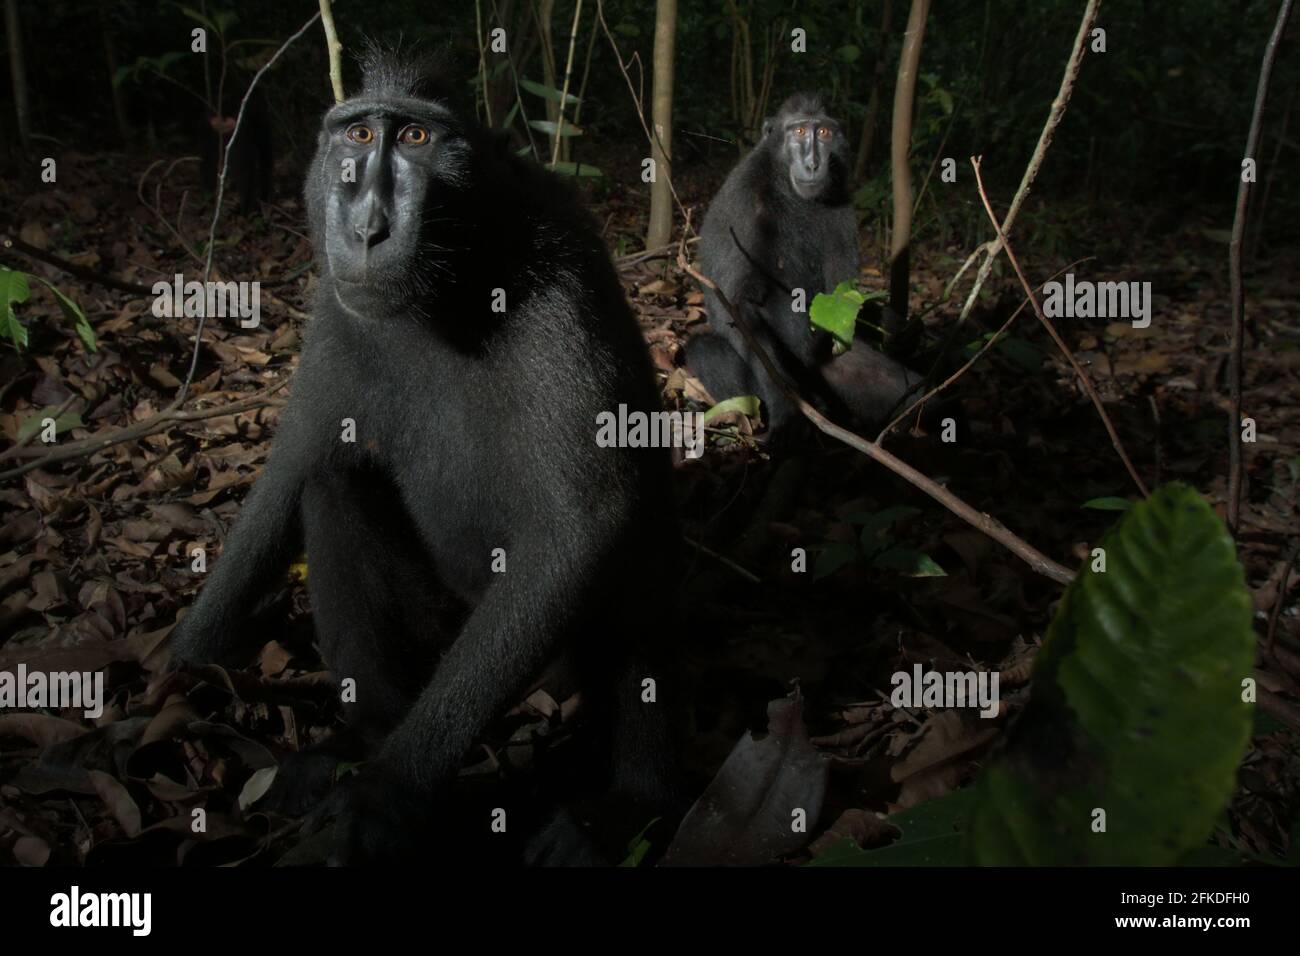 Crested macaques (Macaca nigra) are looking curiously on flashlight as they are sitting down on forest ground in Tangkoko, North Sulawesi, Indonesia. Stock Photo